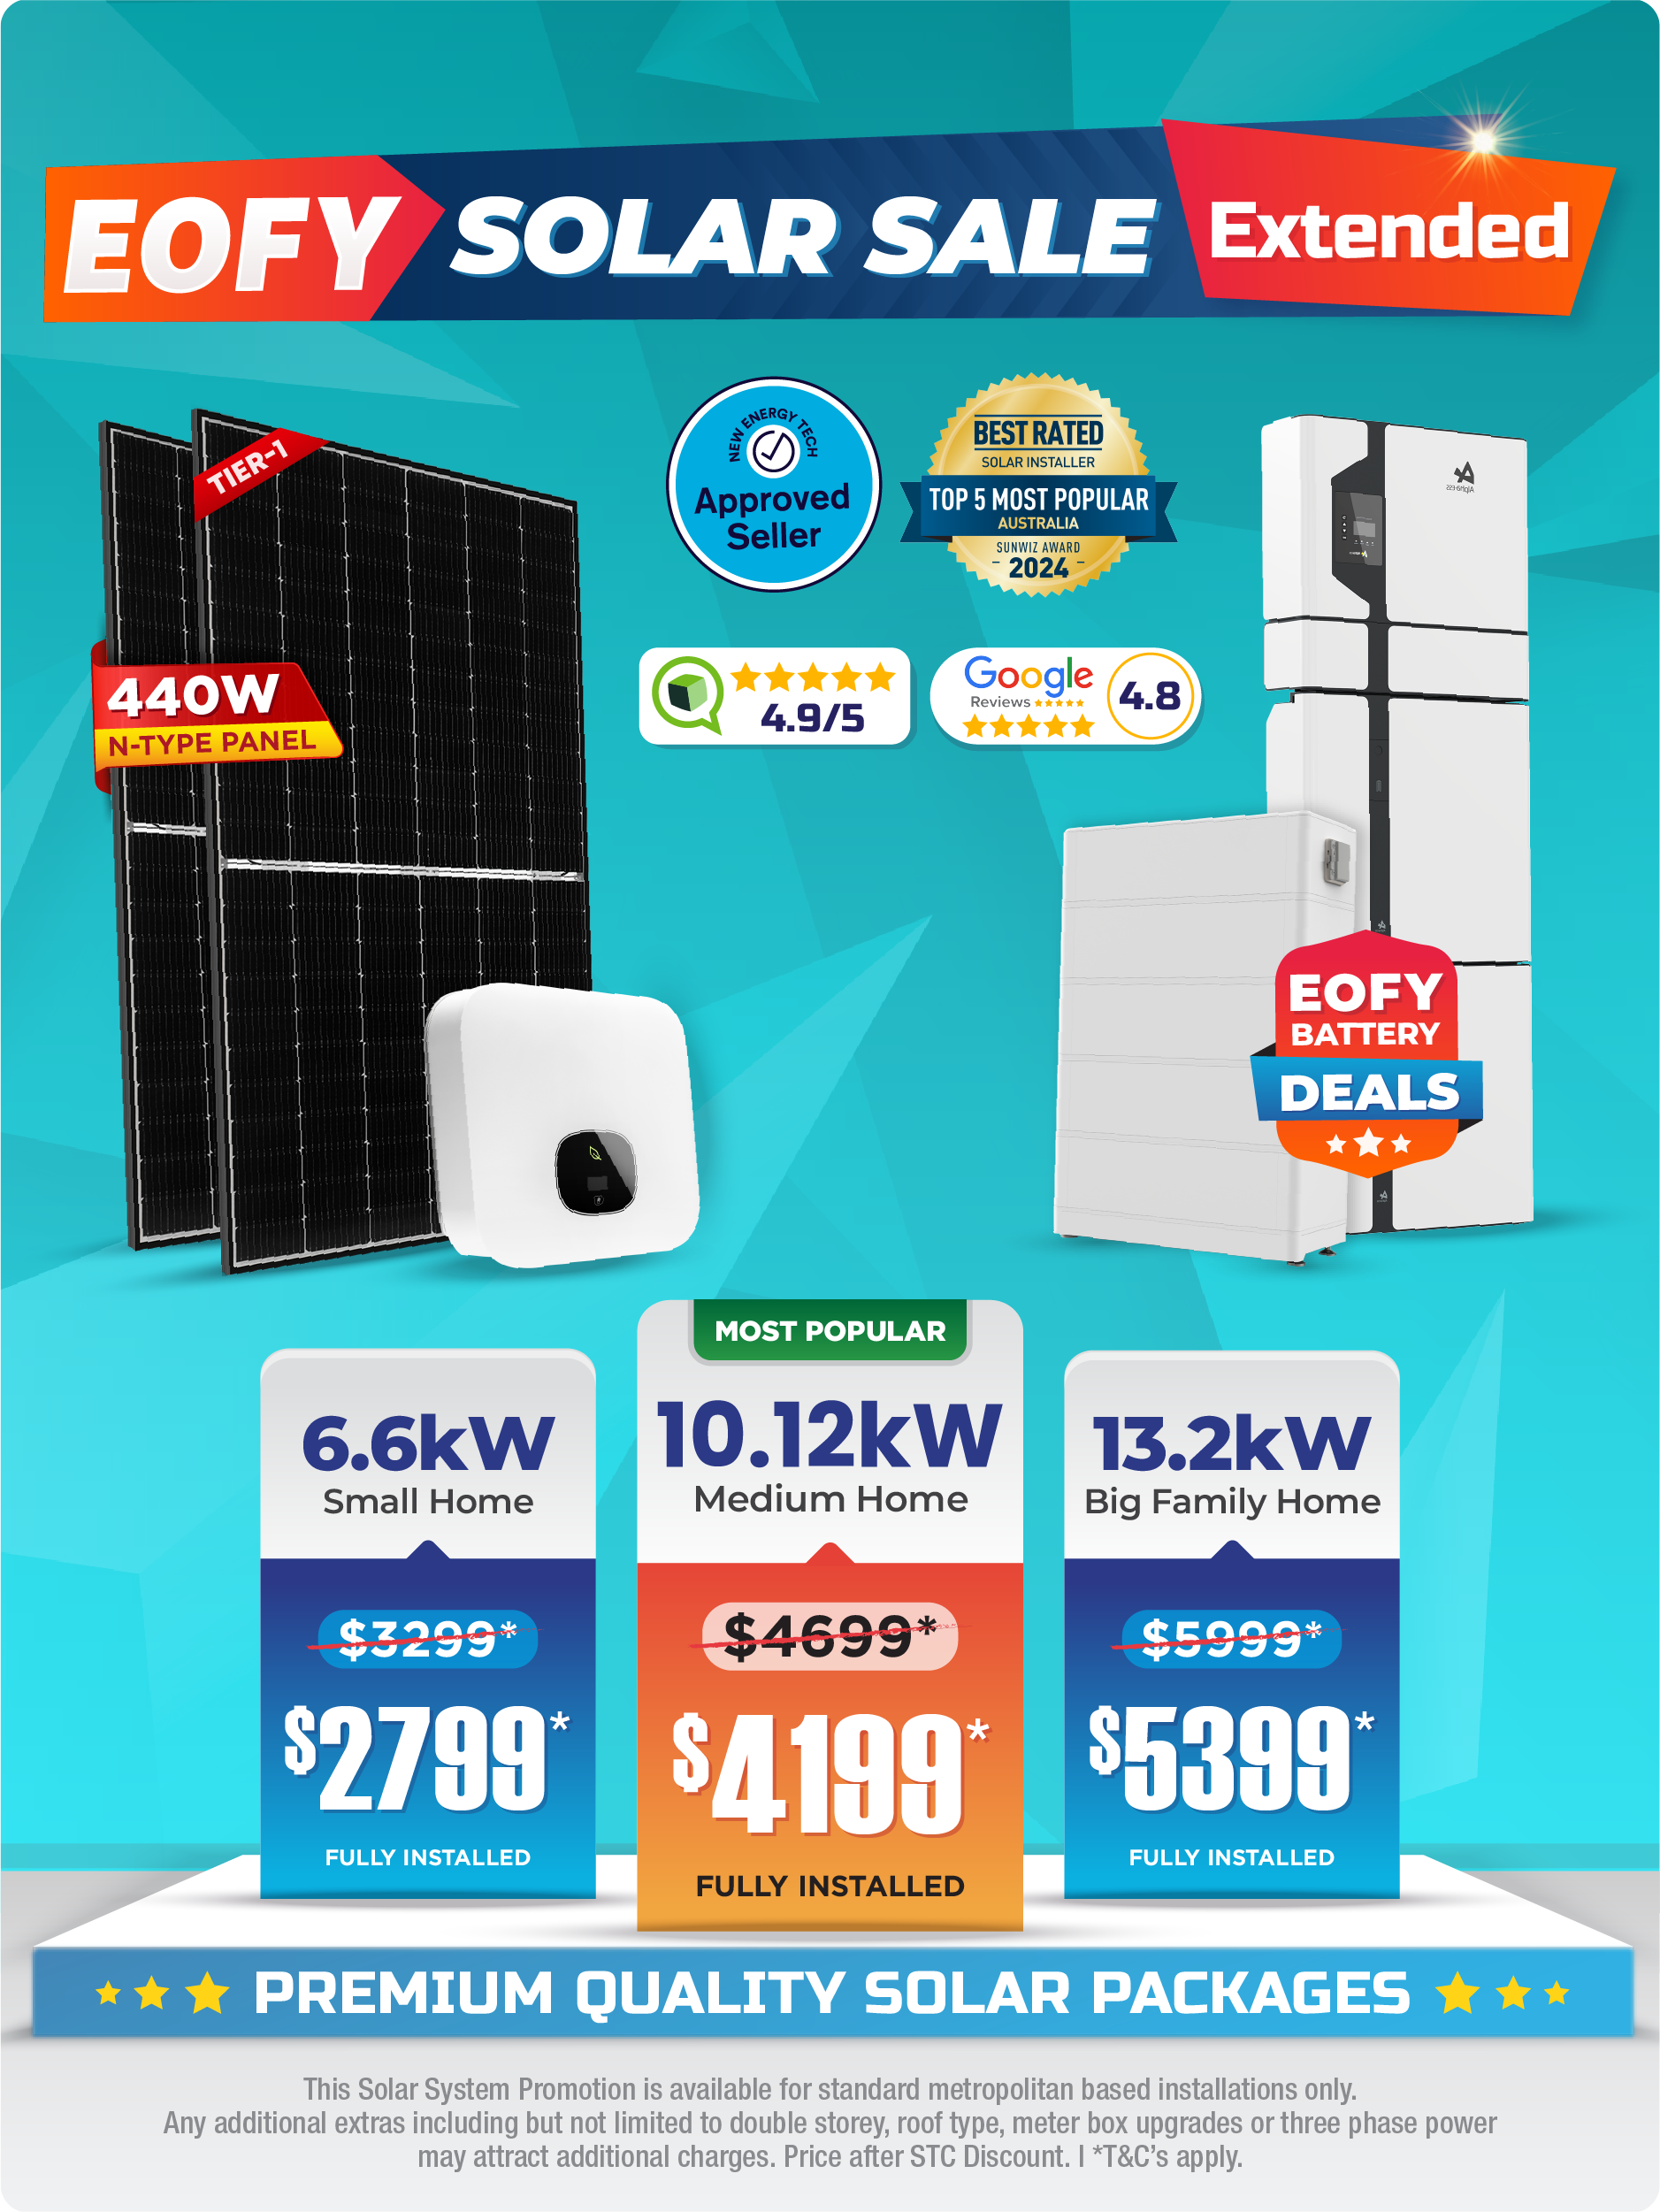 10kw Solar Packages